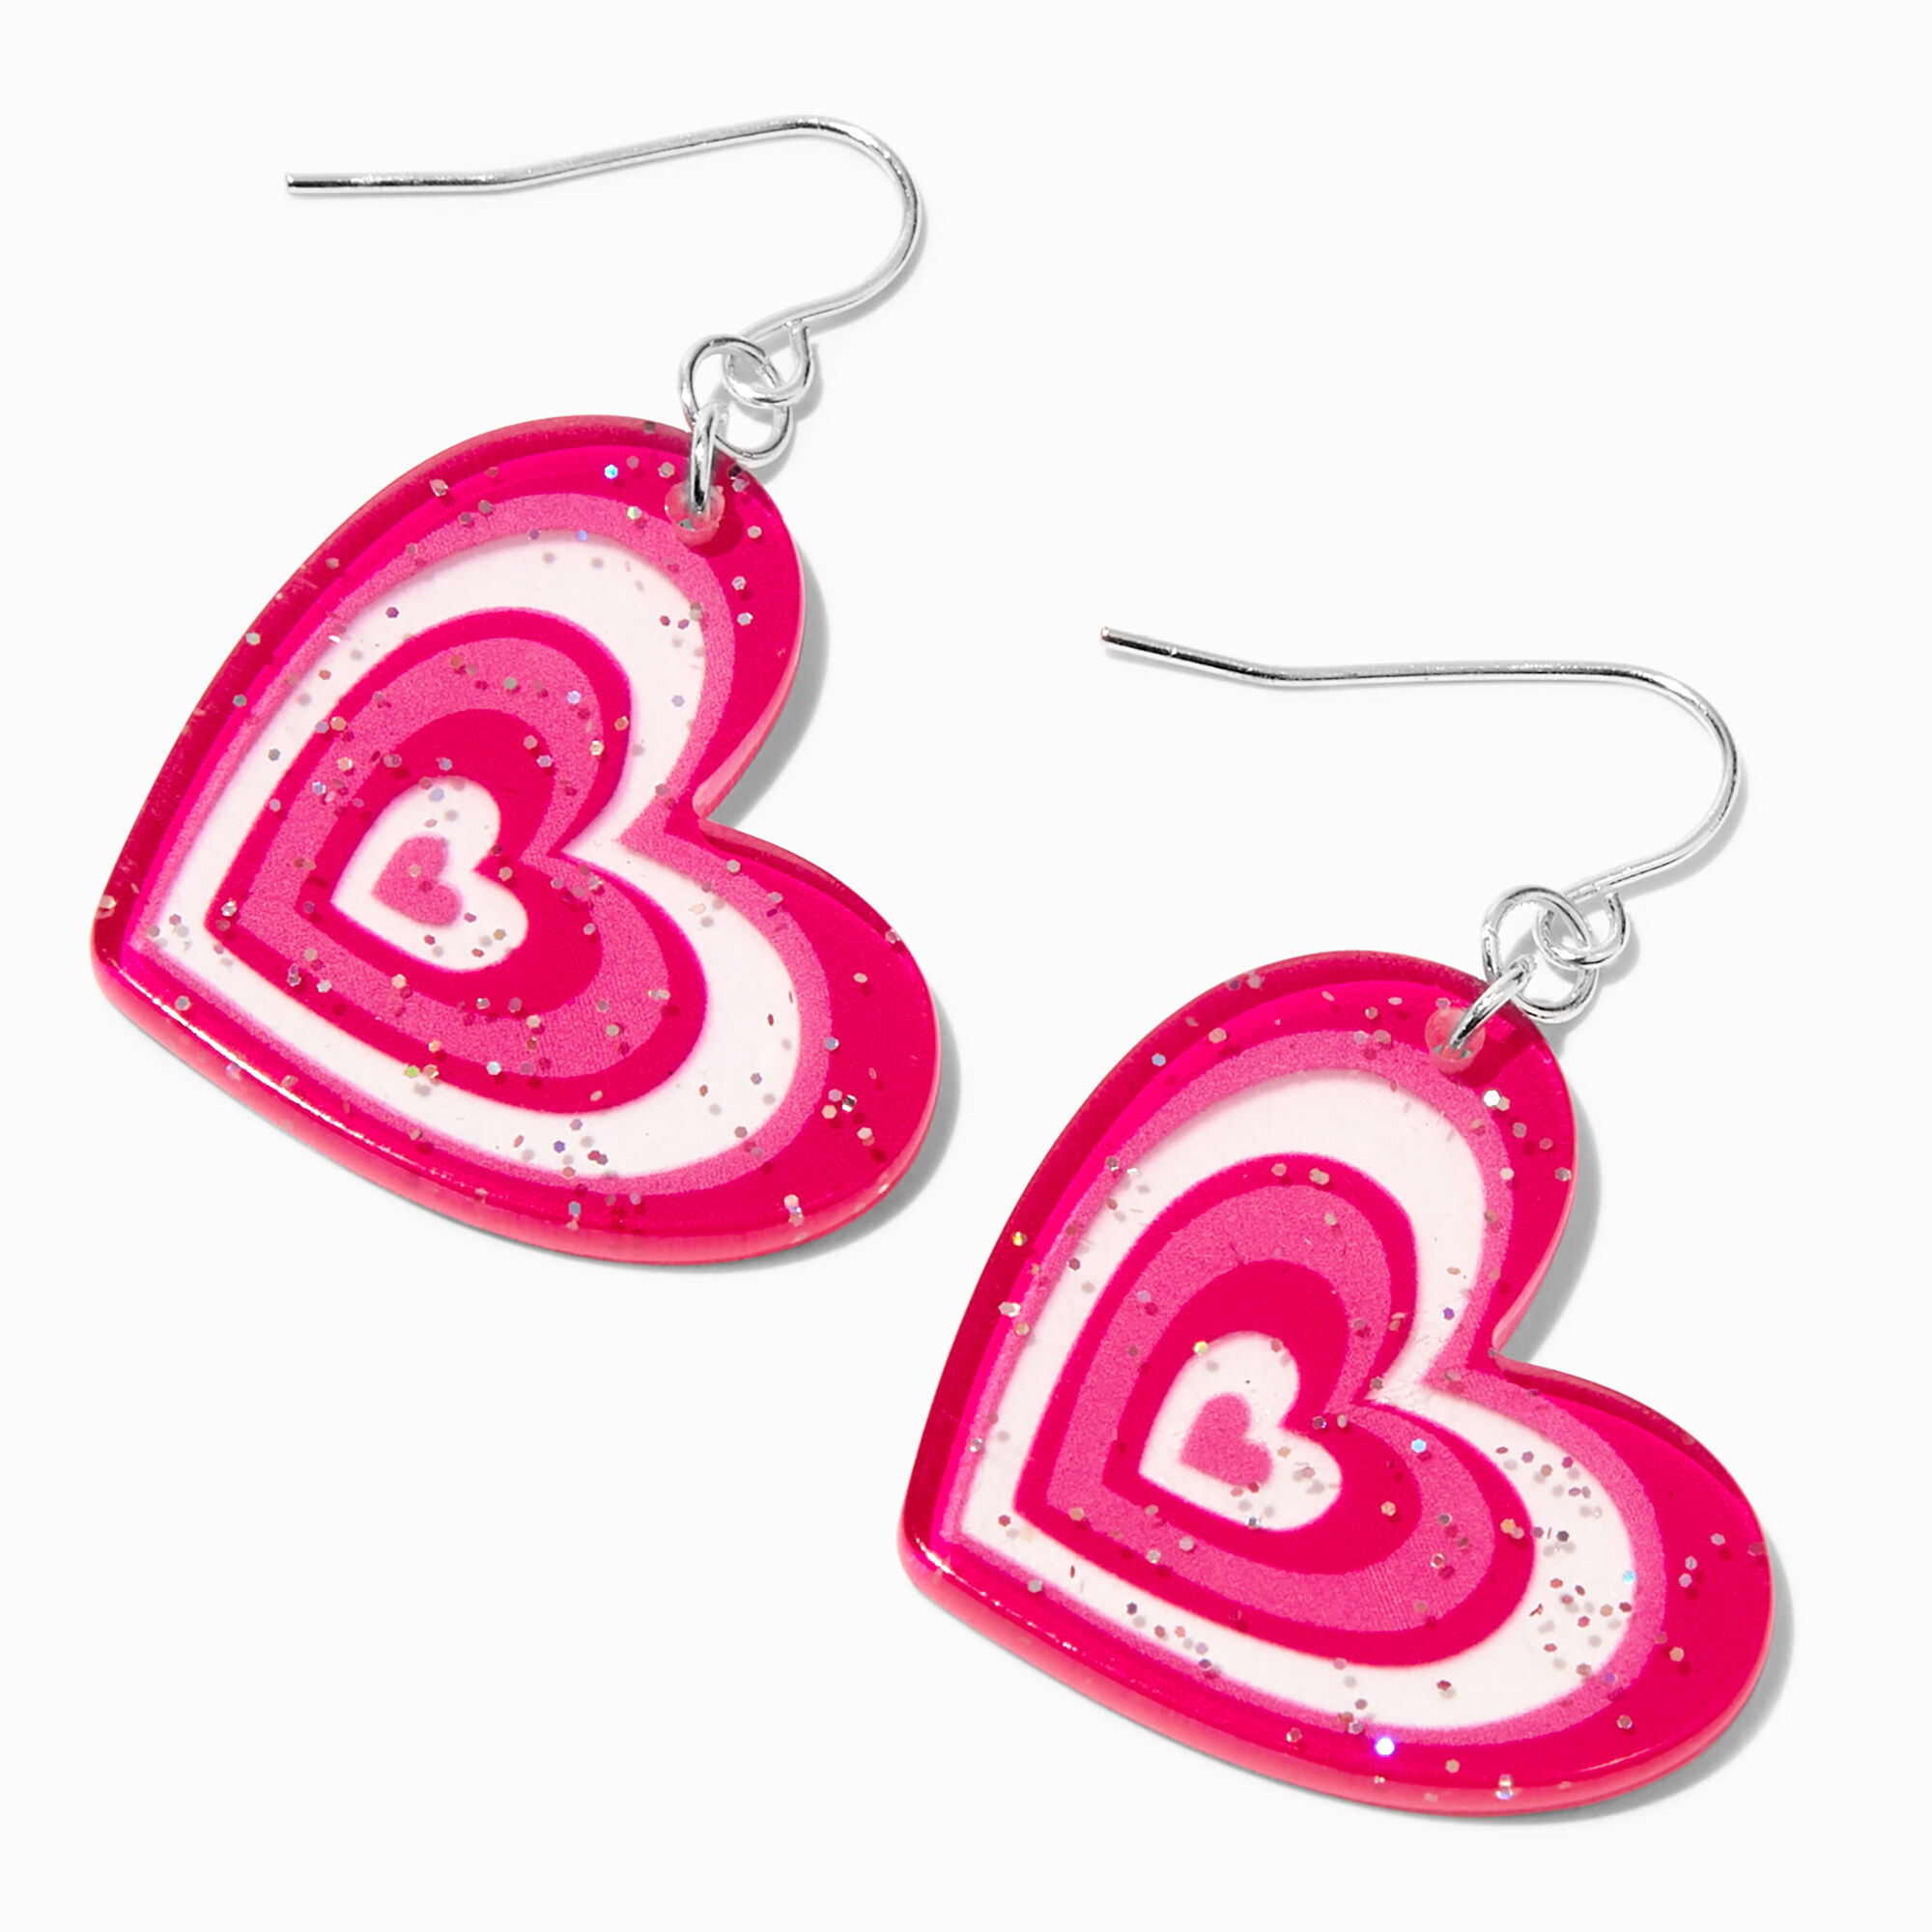 View Claires Pulsating Heart 15 Drop Earrings Pink information